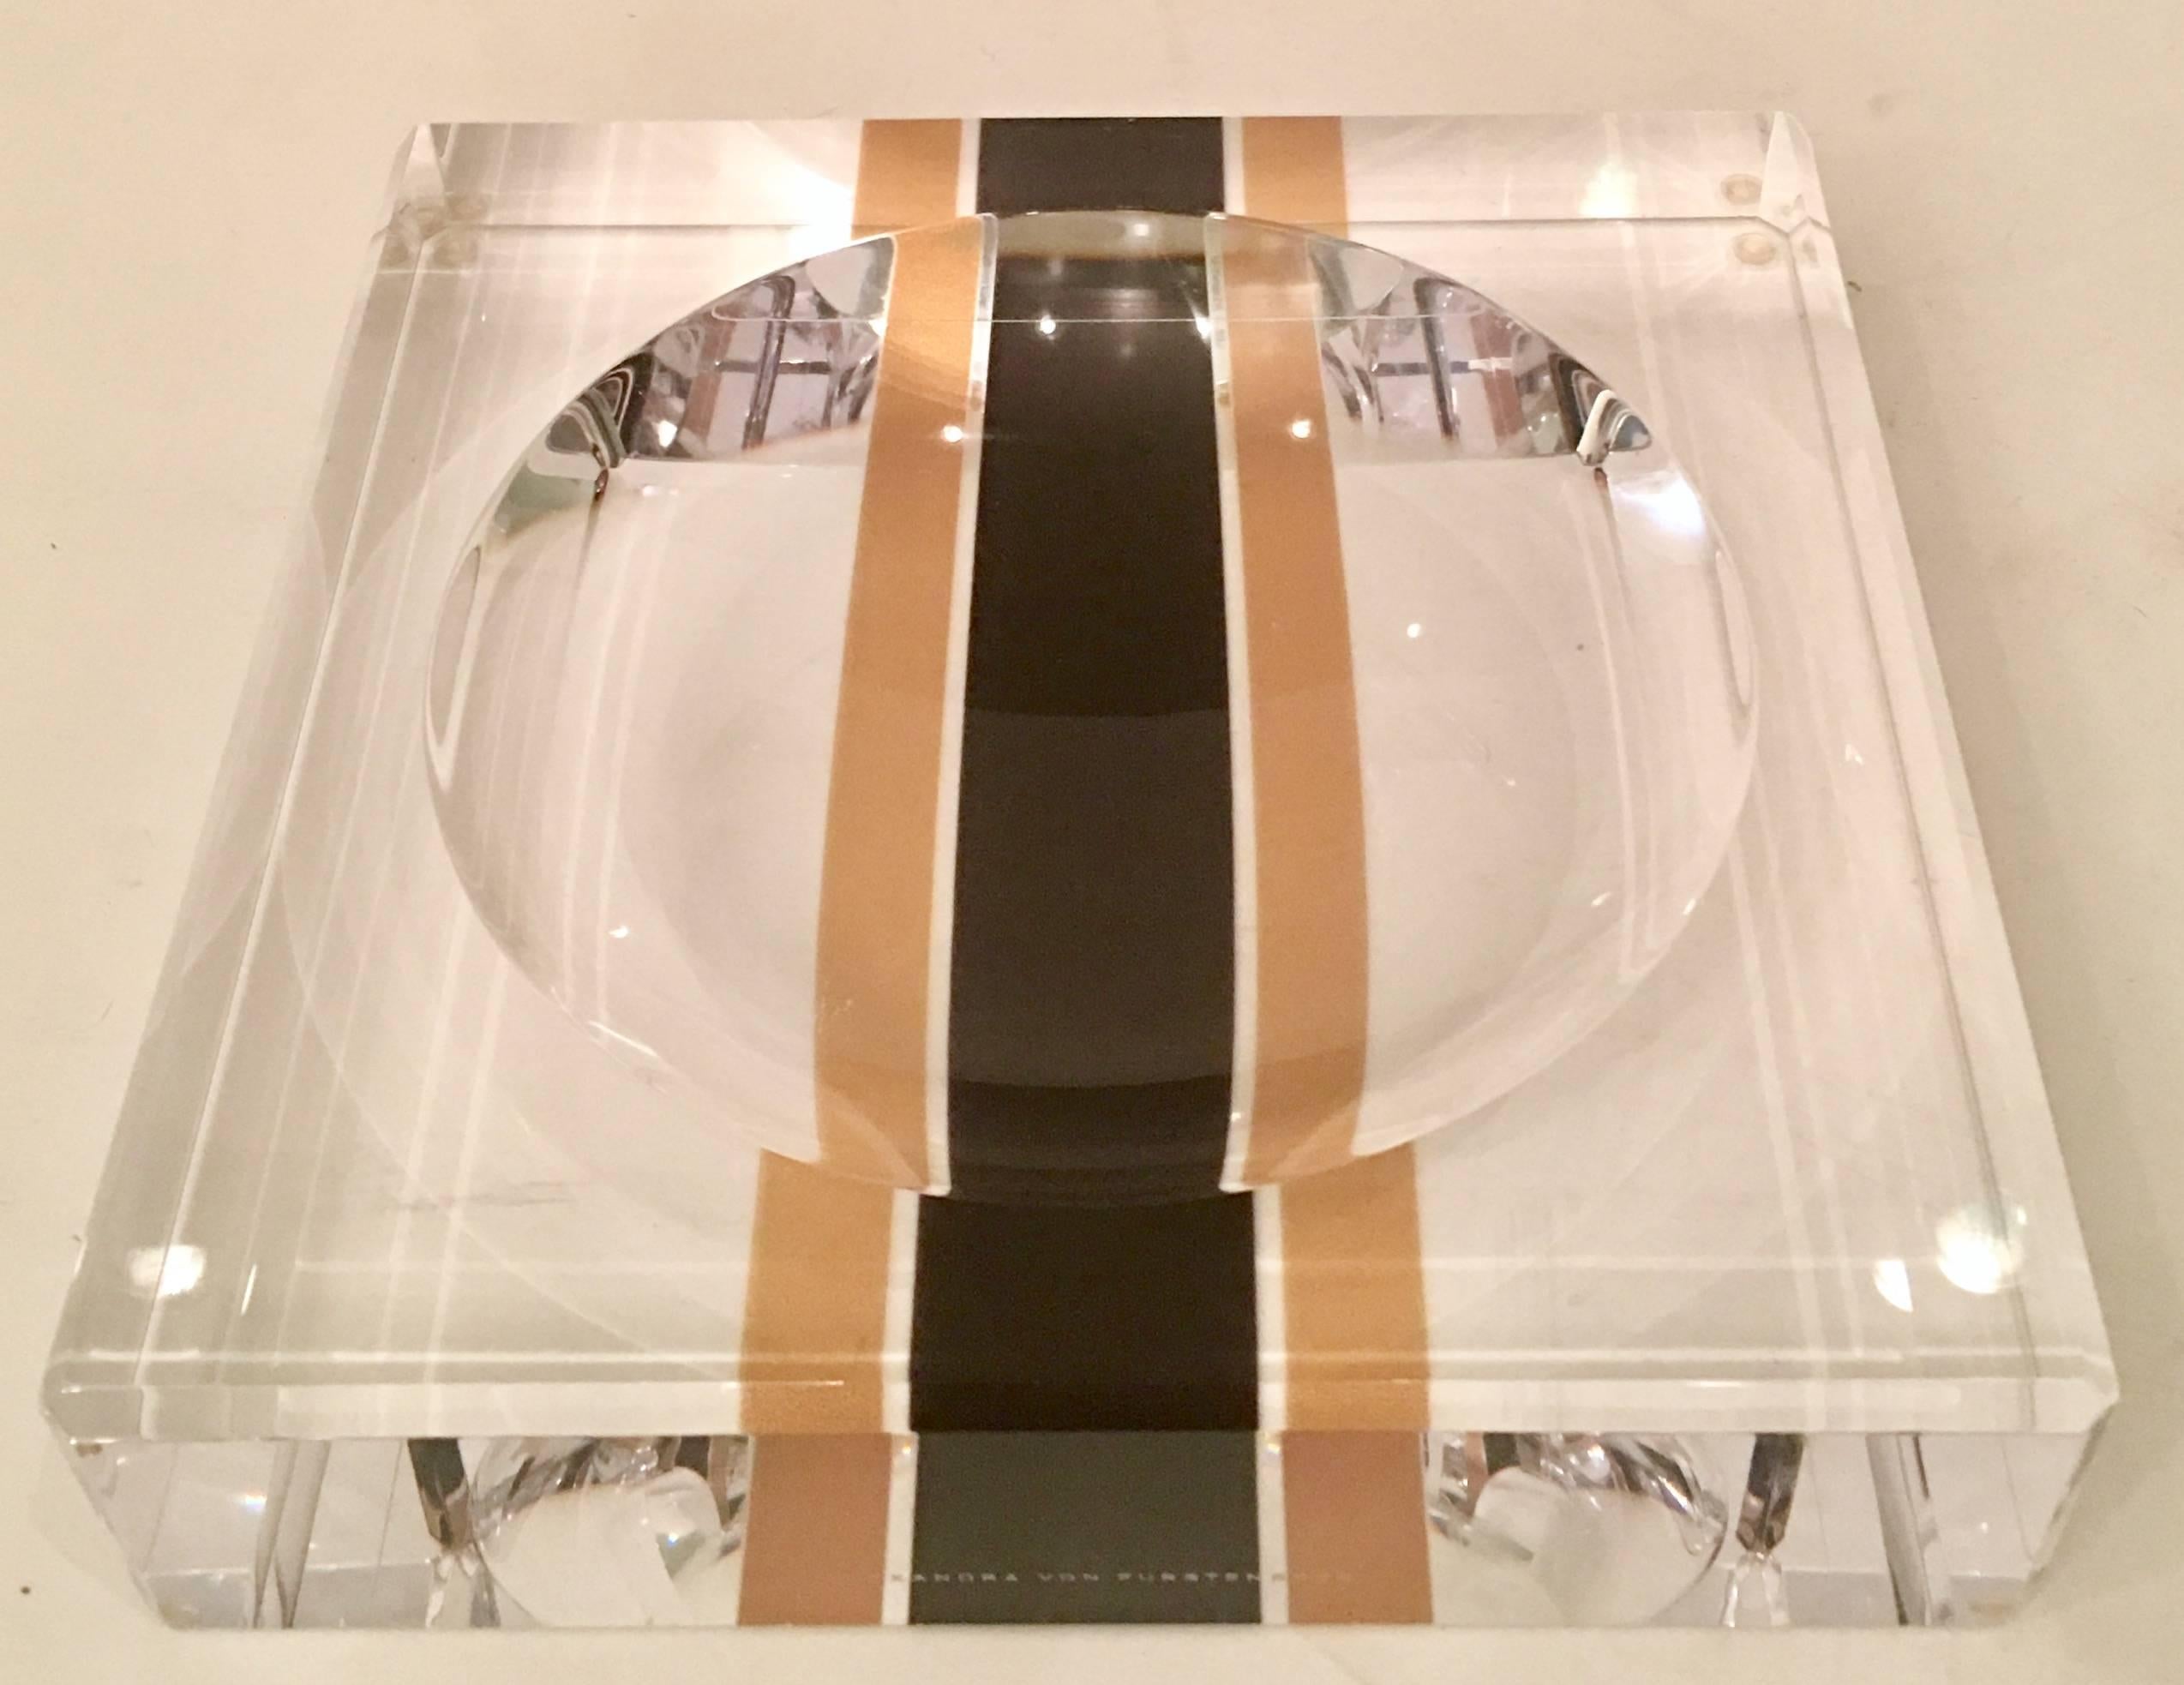 Contemporary Lucite two inch thick clear acrylic printed racing stripe square bowl by, Alexandra Von Furstenberg. Features a brown and copper central stripe with a carved cut-out central circle/bowl within a square. Hand polished to a high gloss